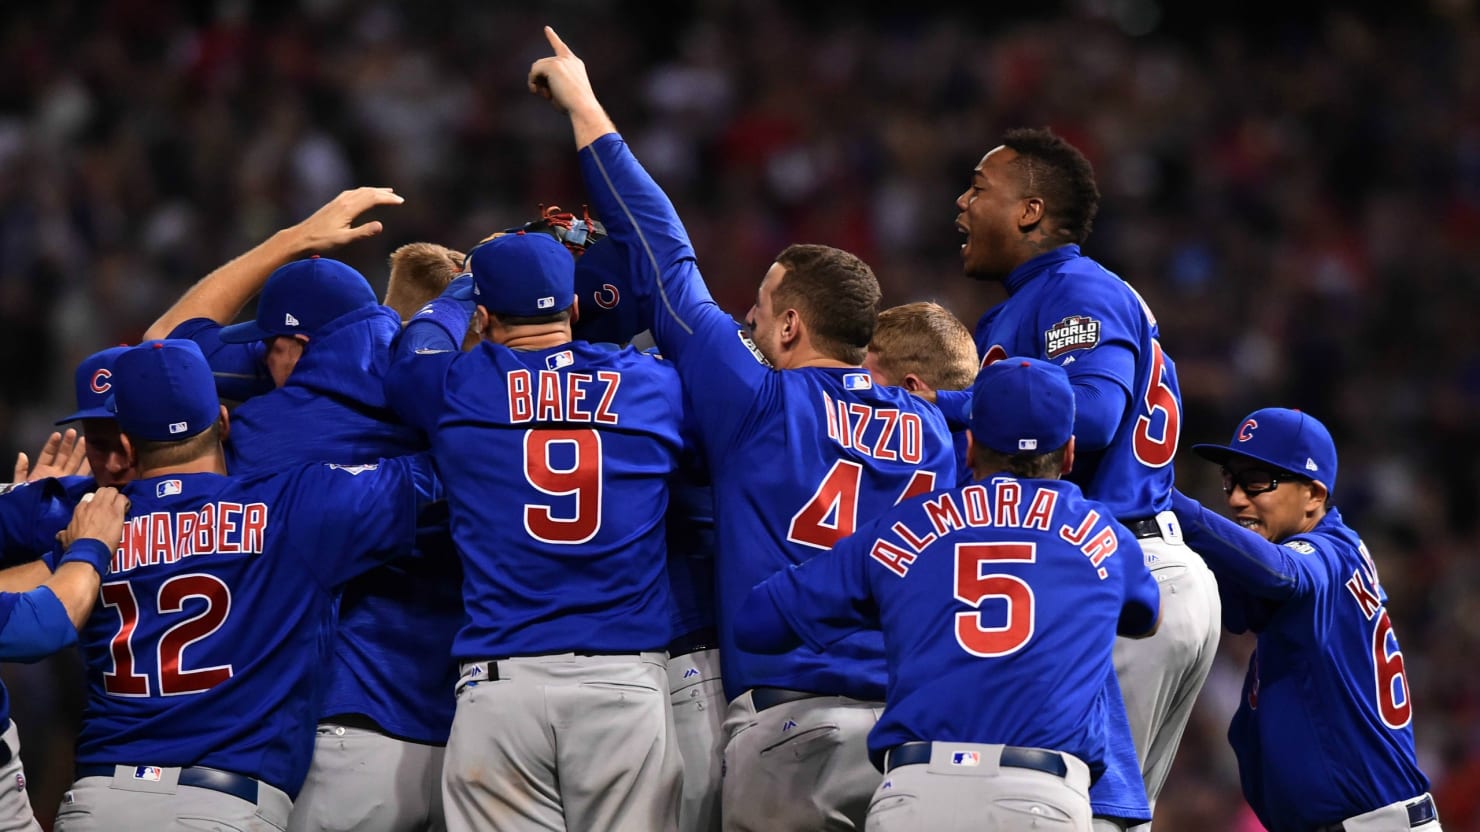 Cubs Win World Series in Extra Innings